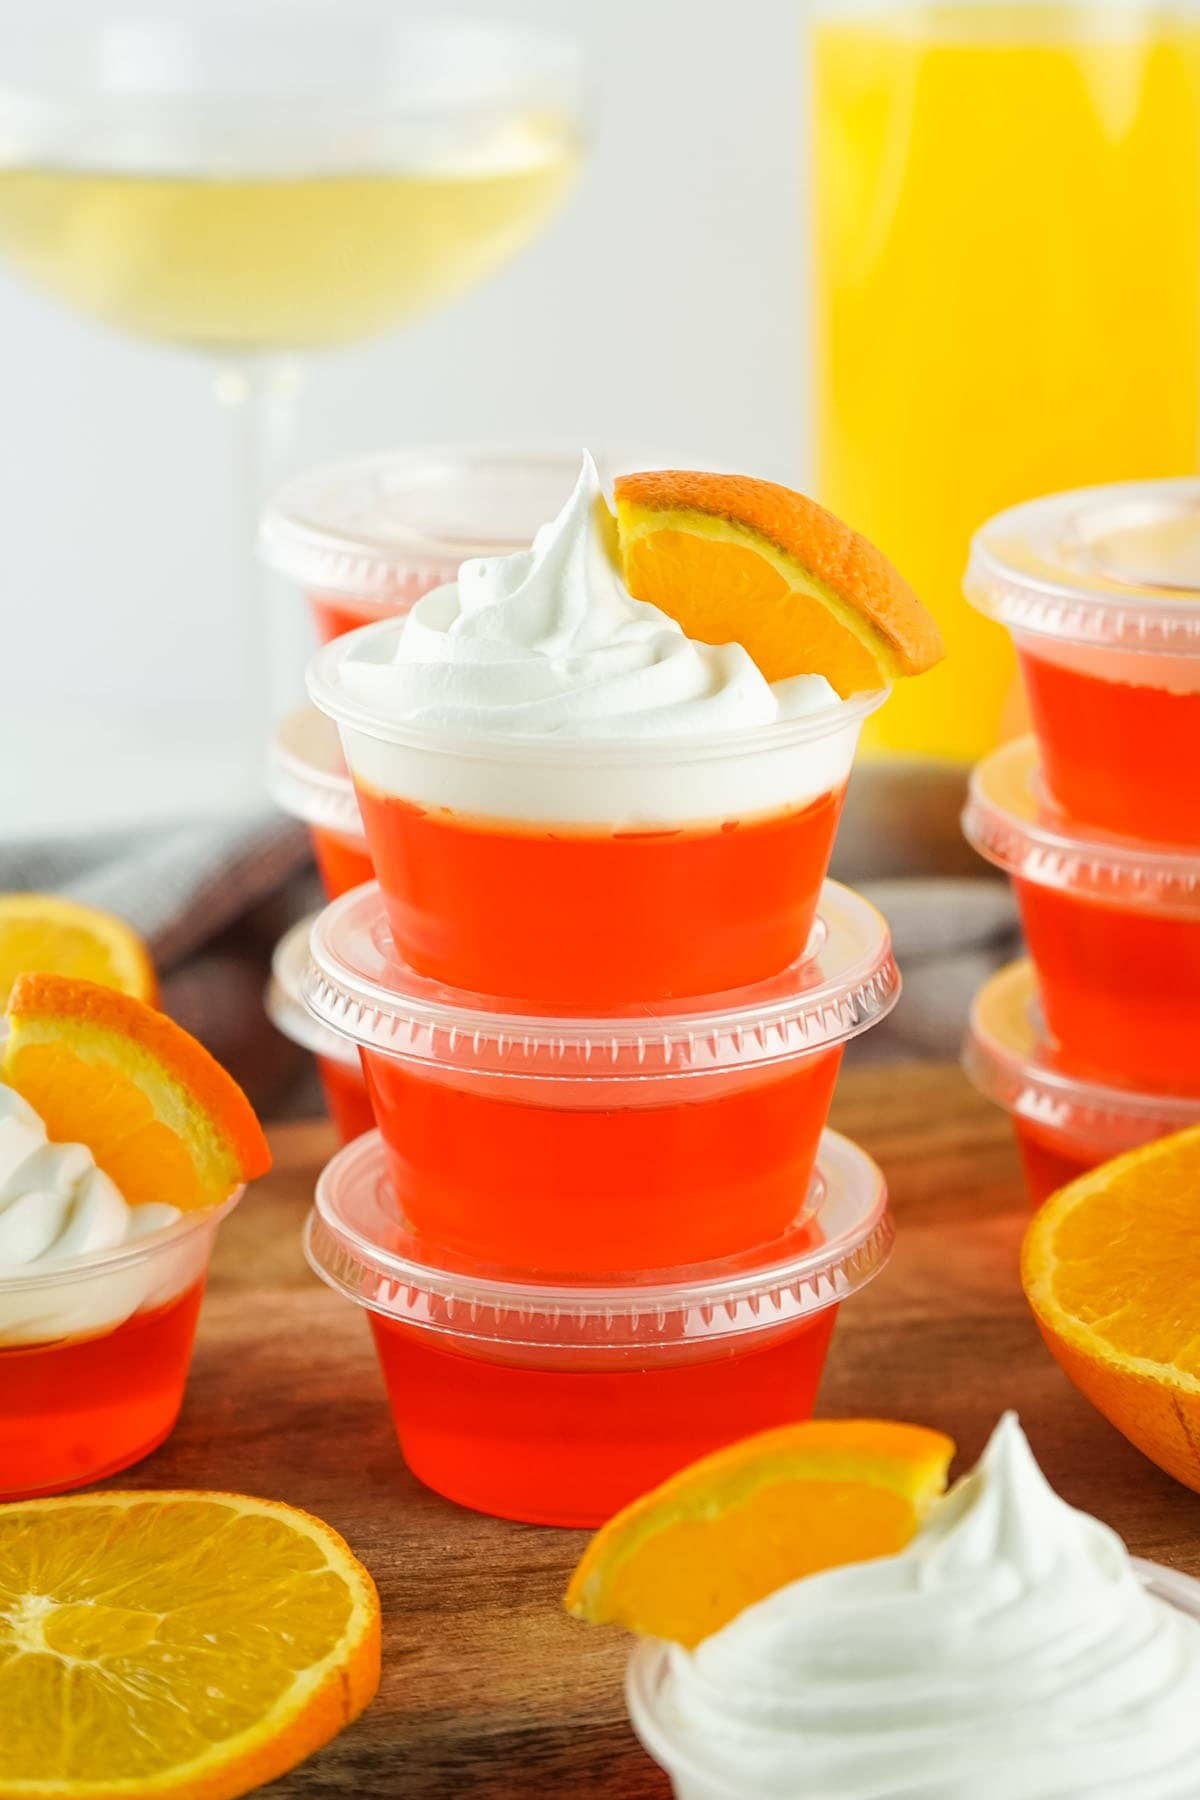 Stack of Mimosa Jello shots on plastic cups garnished with shipped cream and orange slices.